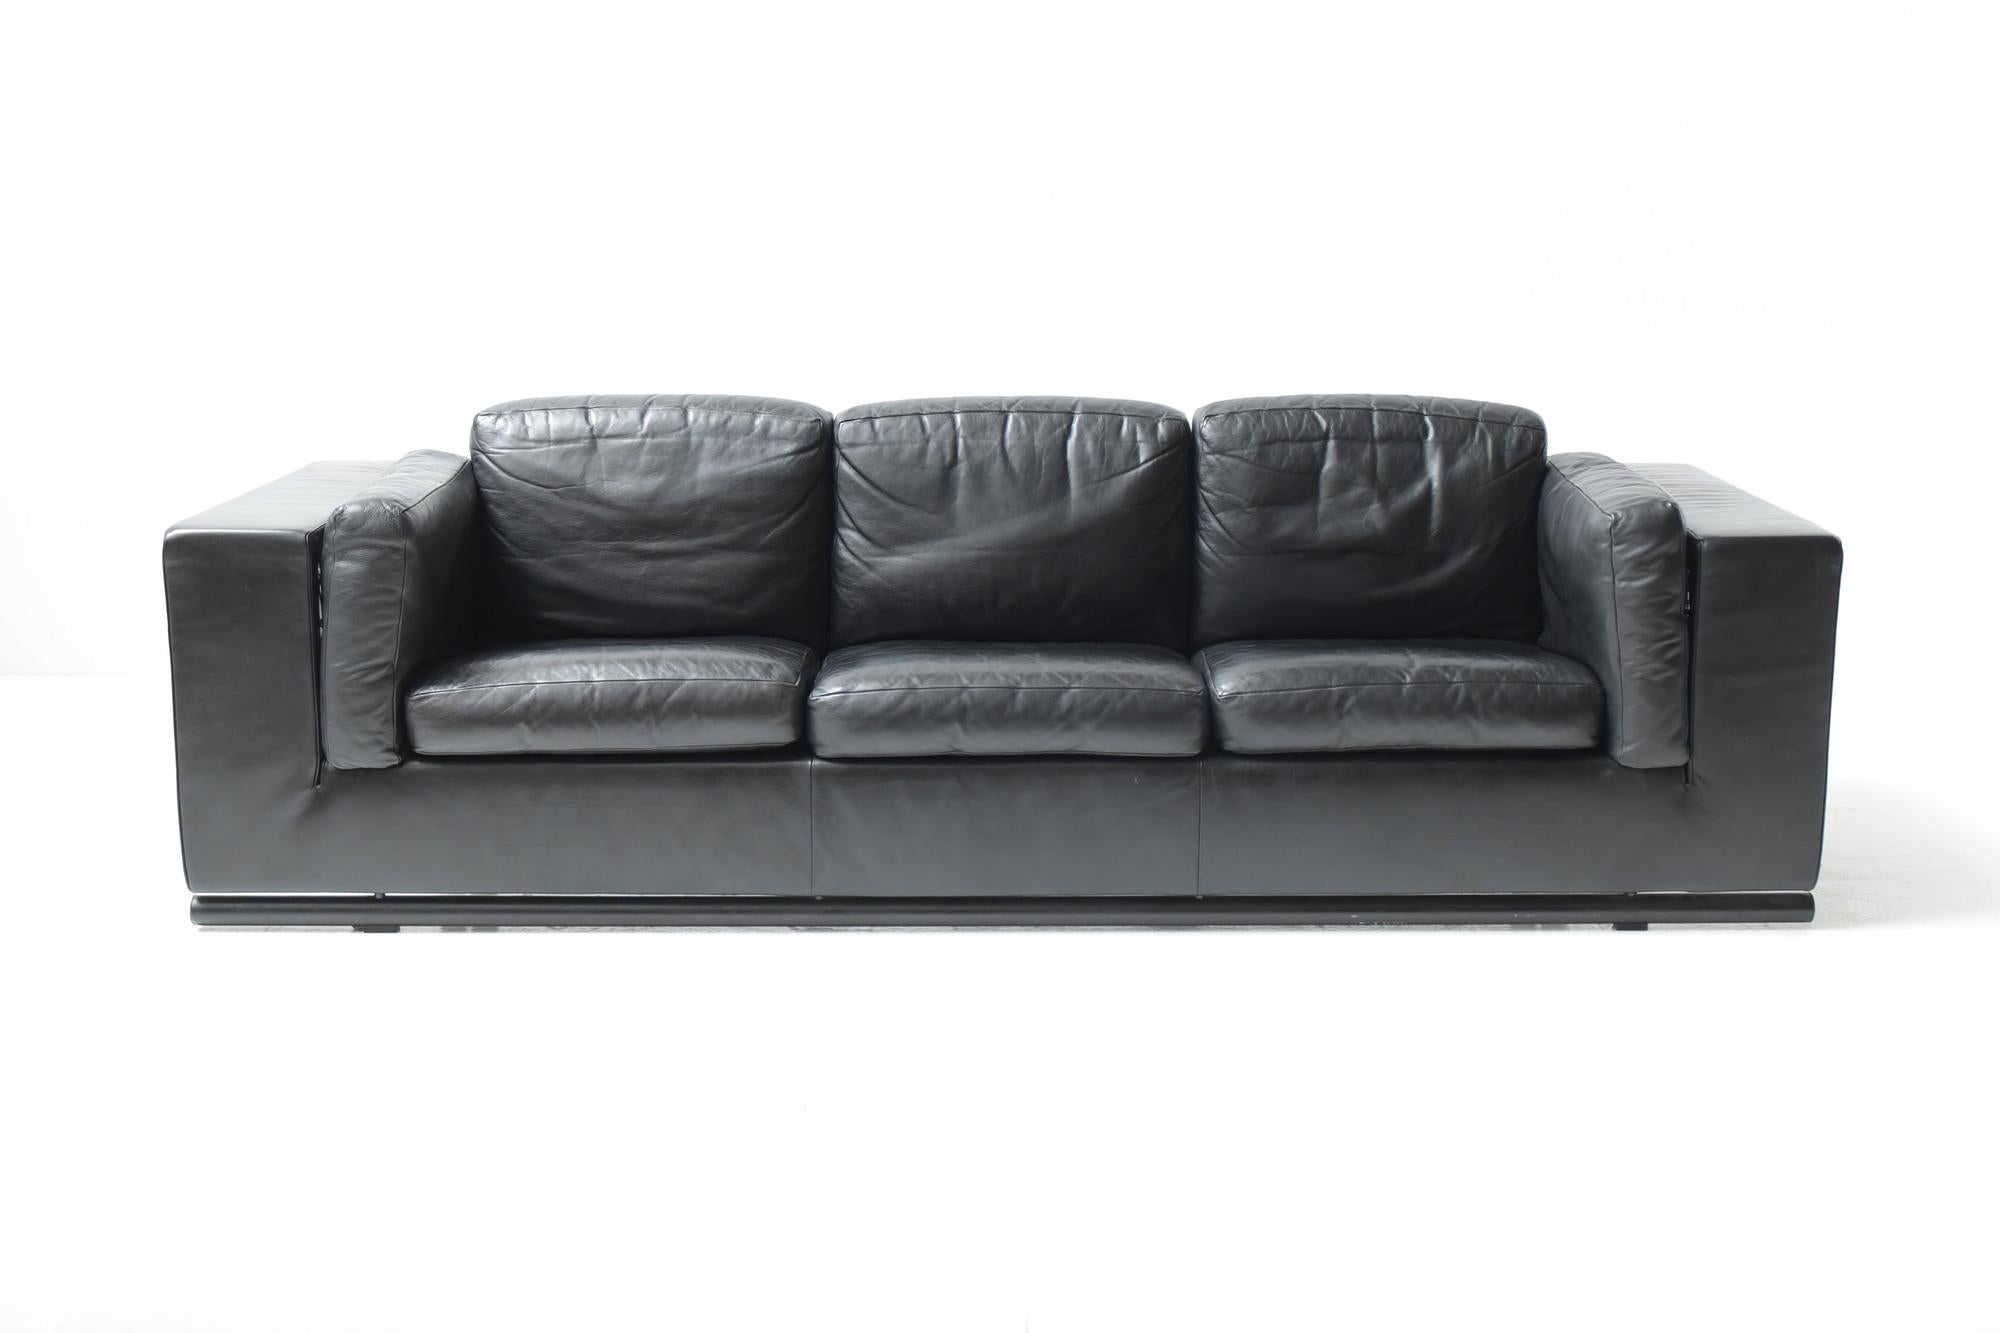 20th Century Extremely Rare Vintage Sofa by Paolo Piva for De Sede Swiss 1970s For Sale